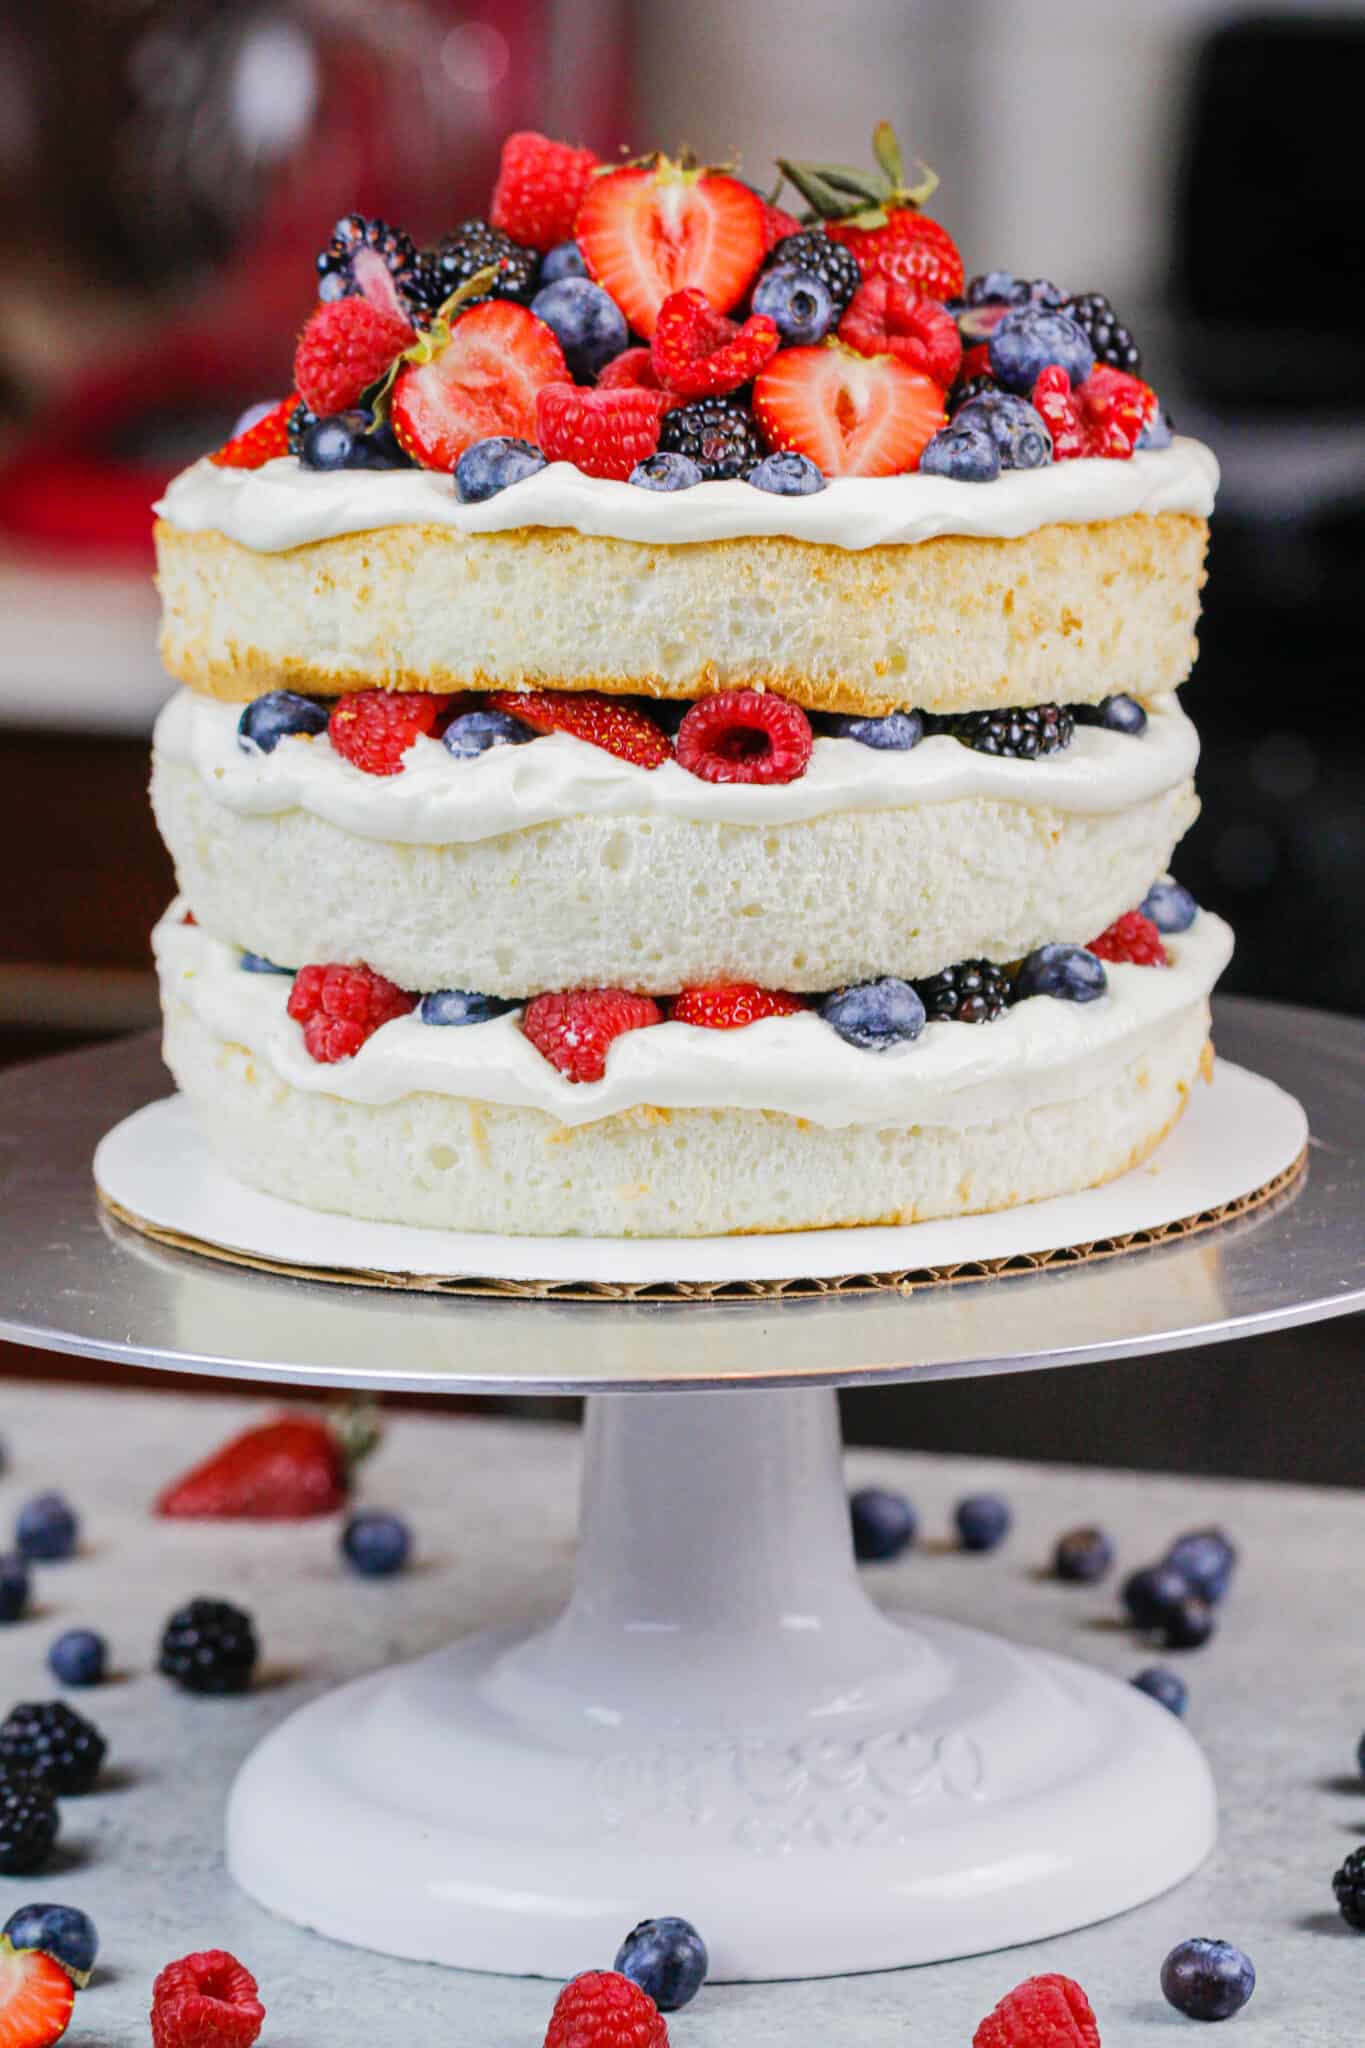 Layered Angel Food Cake - Fluffy Cake Layers Frosted w/ Whipped Cream